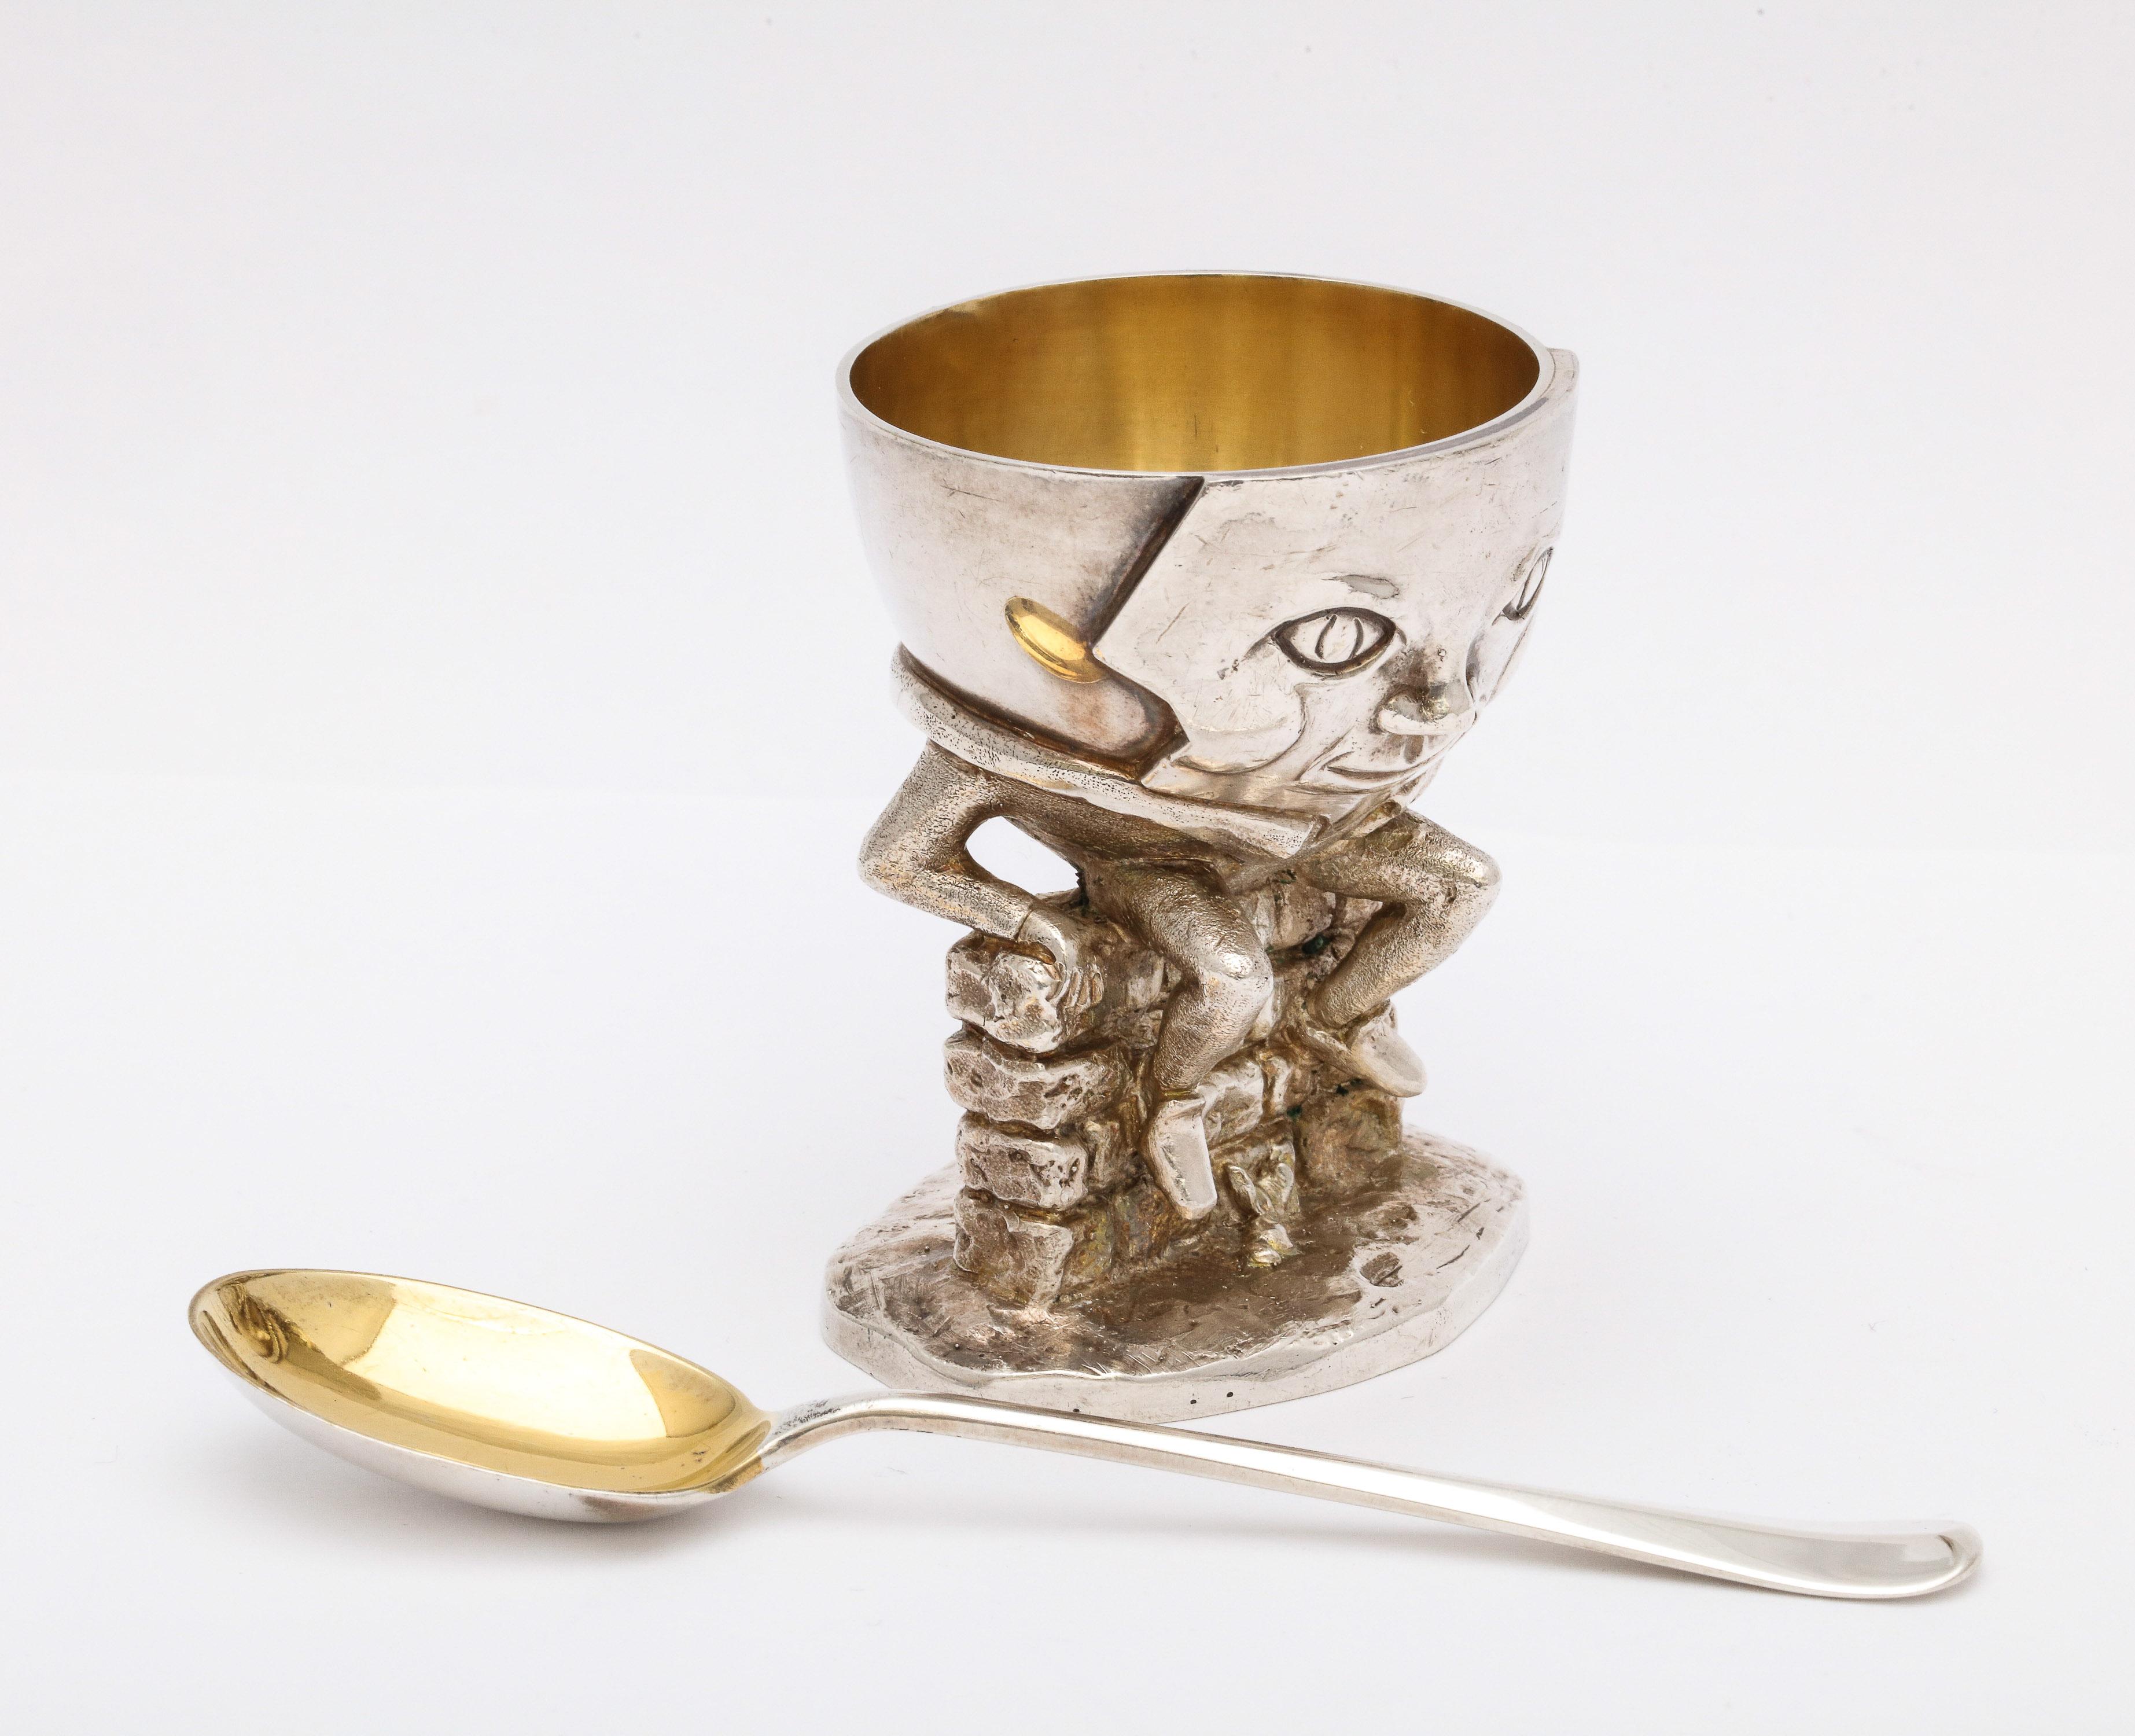 Unusual Midcentury Sterling Silver Humpty Dumpty Egg Cup and Matching Spoon 1